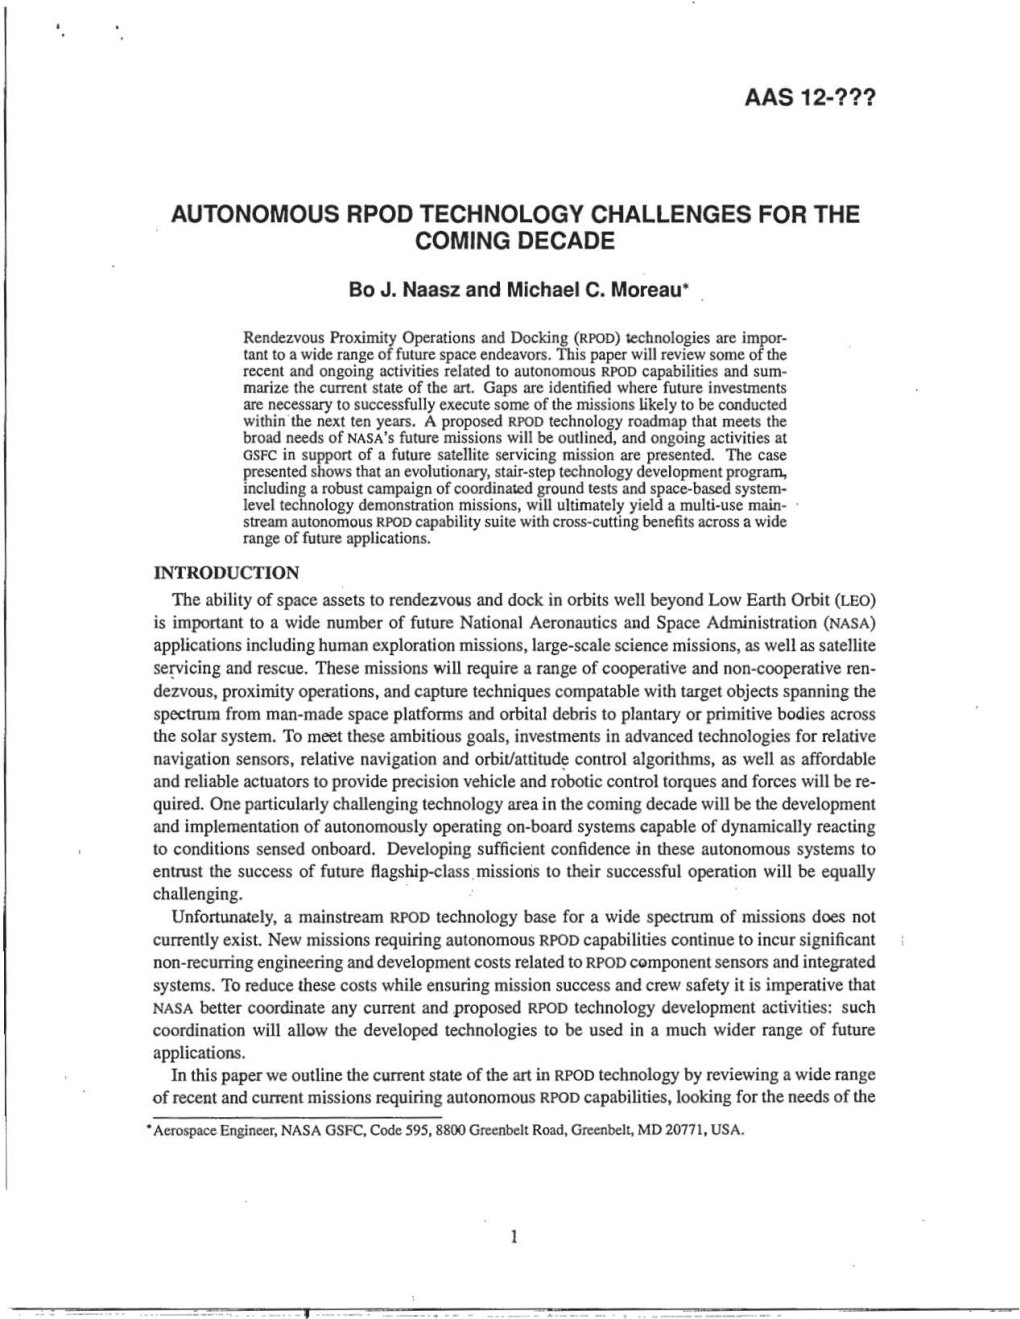 Autonomous Rpod Technology Challenges for the Coming Decade